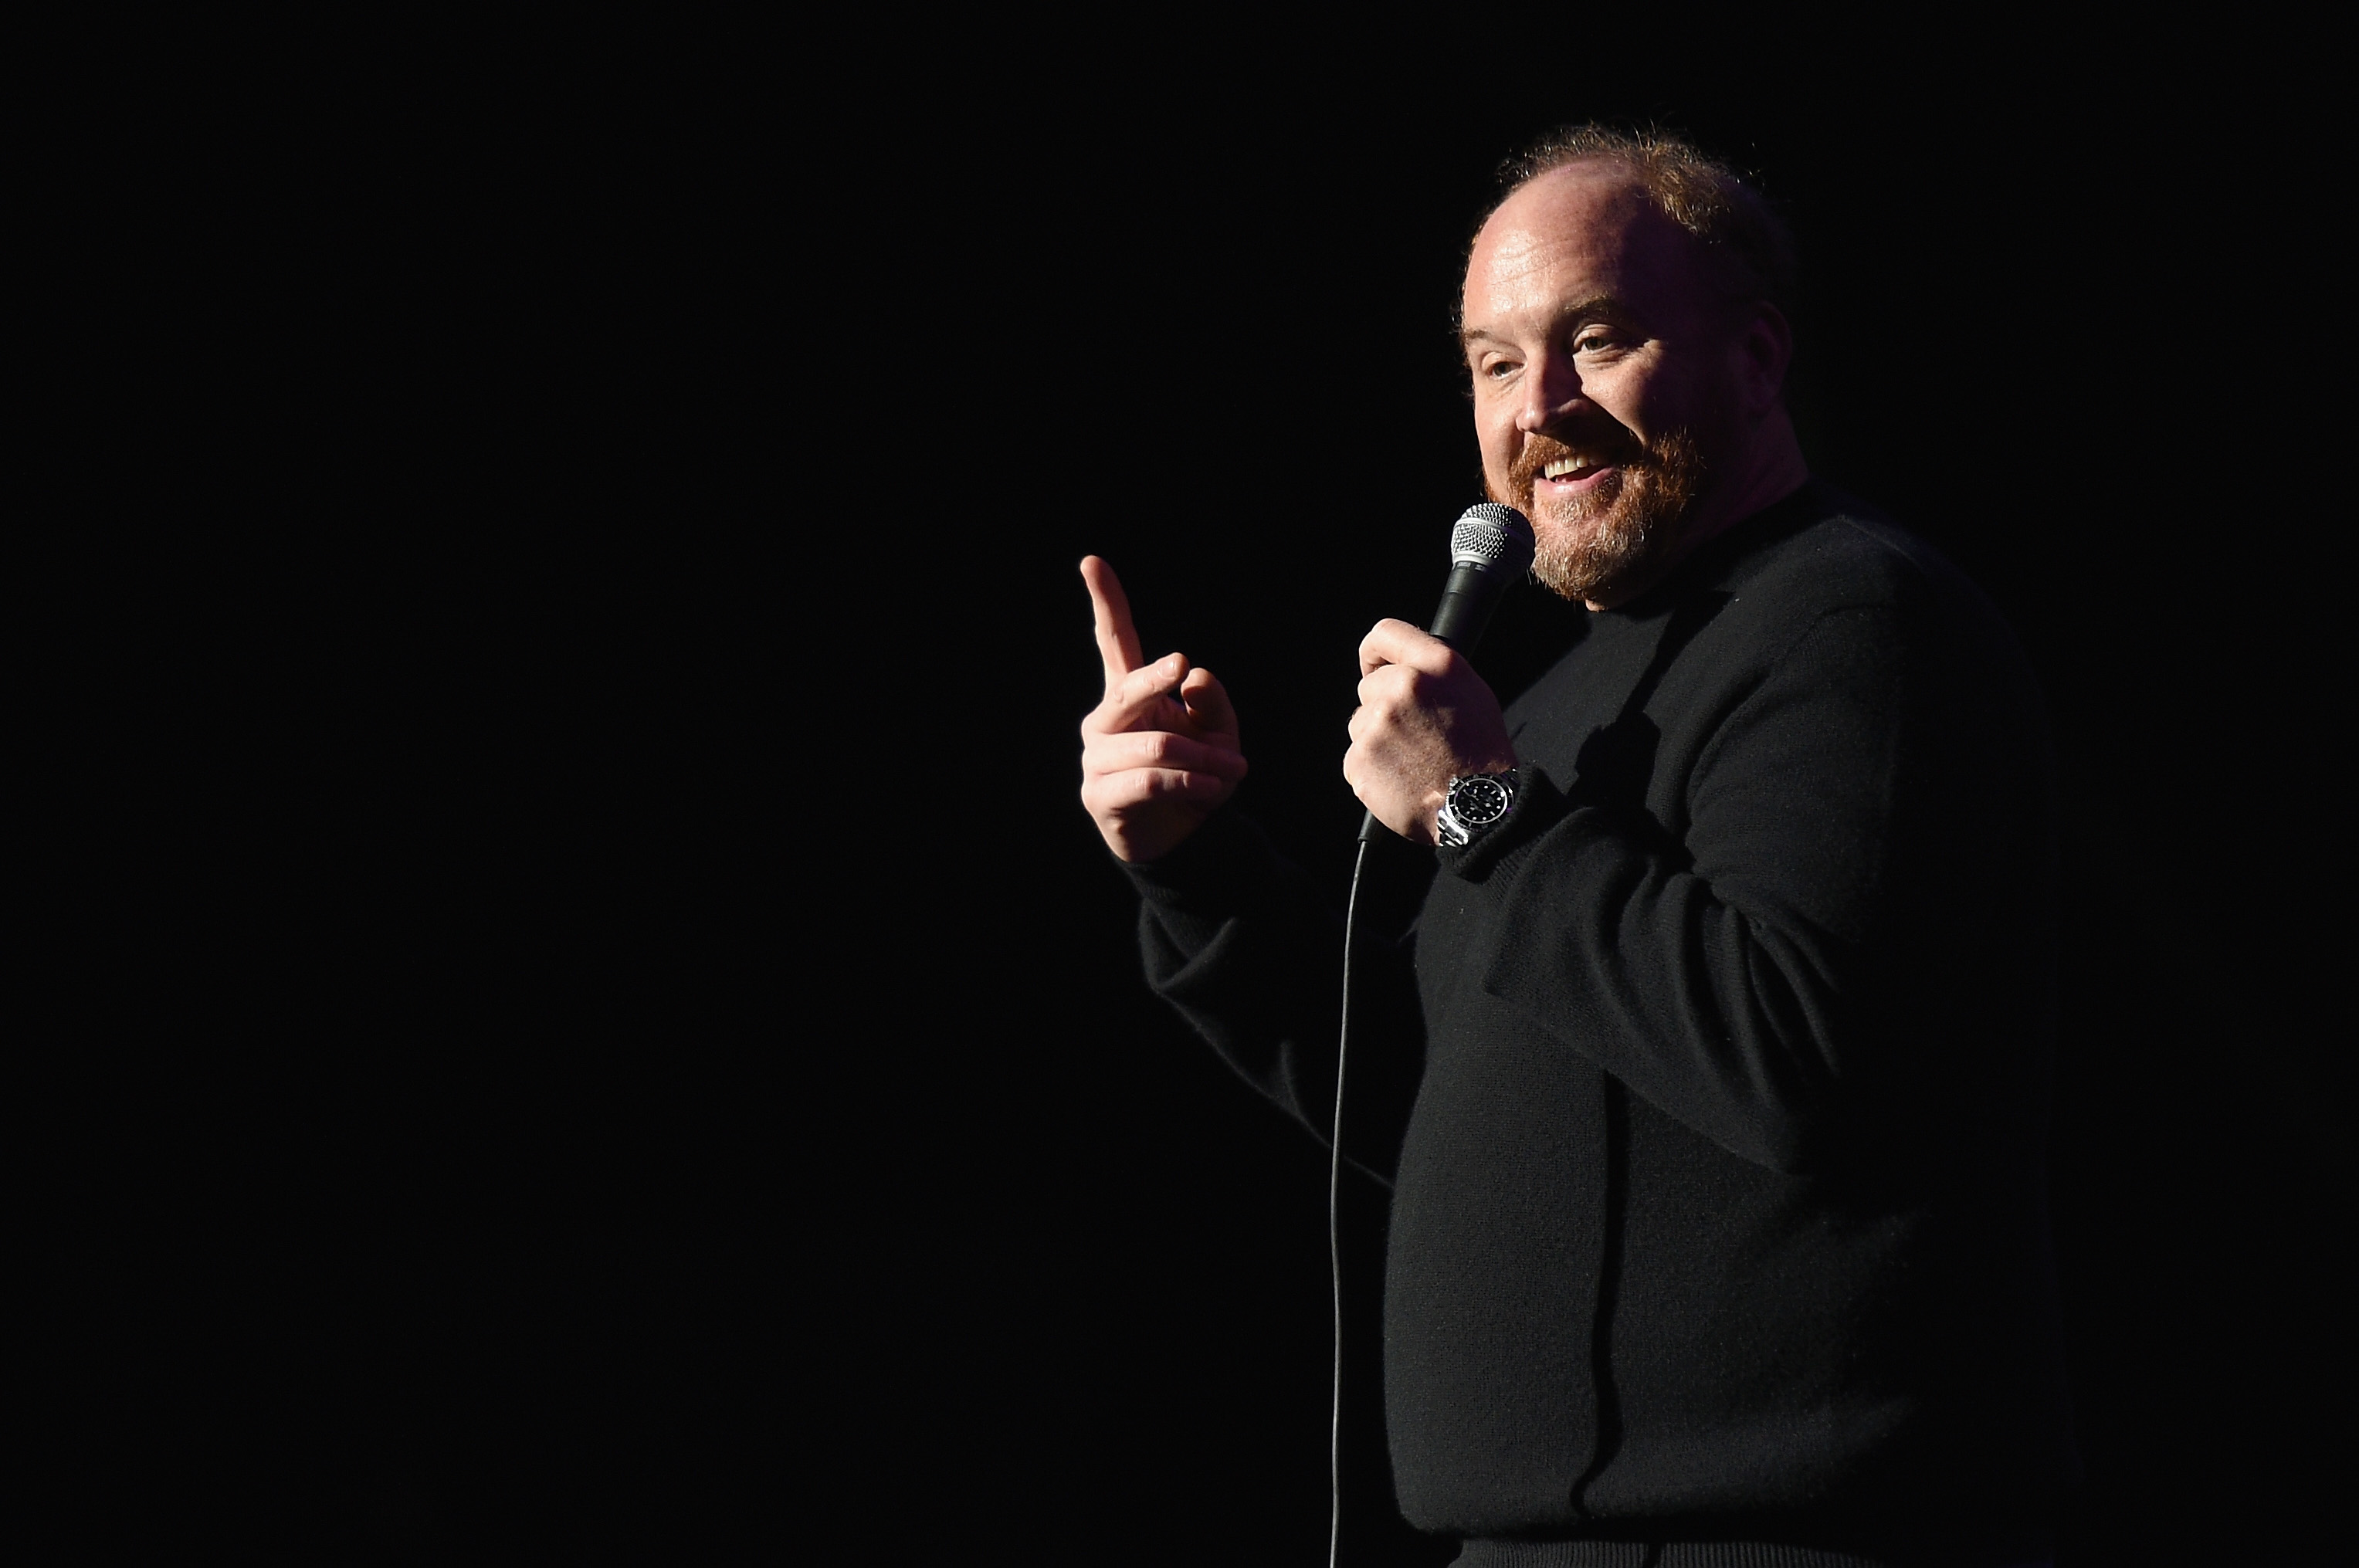 Louis C.K. performs onstage at 2014 Stand Up For Heroes at Madison Square Garden